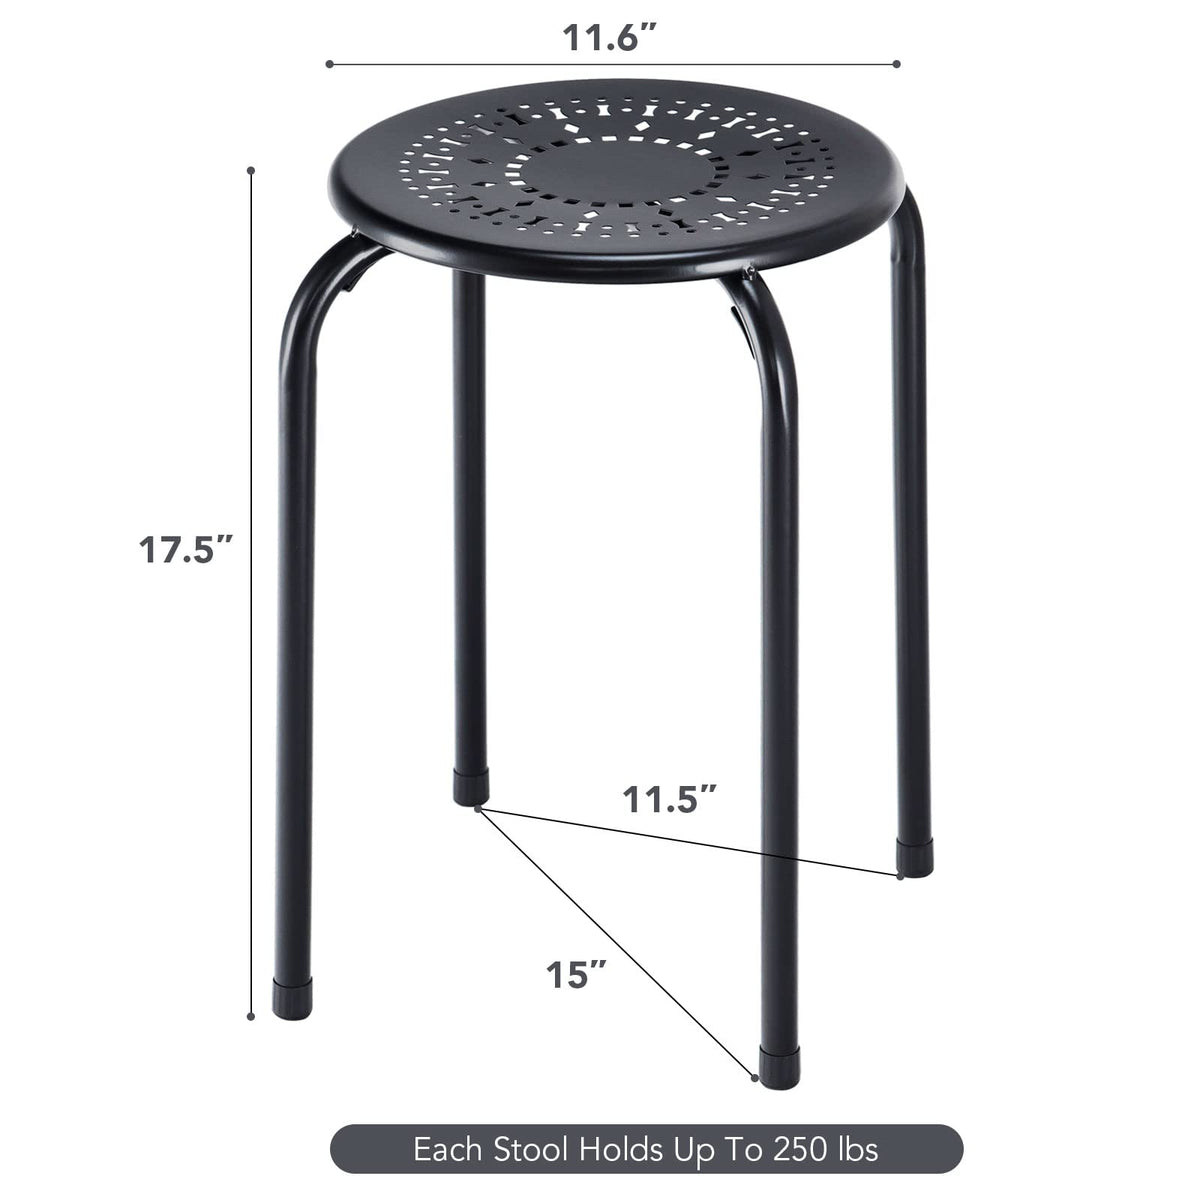 Set of 6 dining stools, Stackable Round Steel Stools